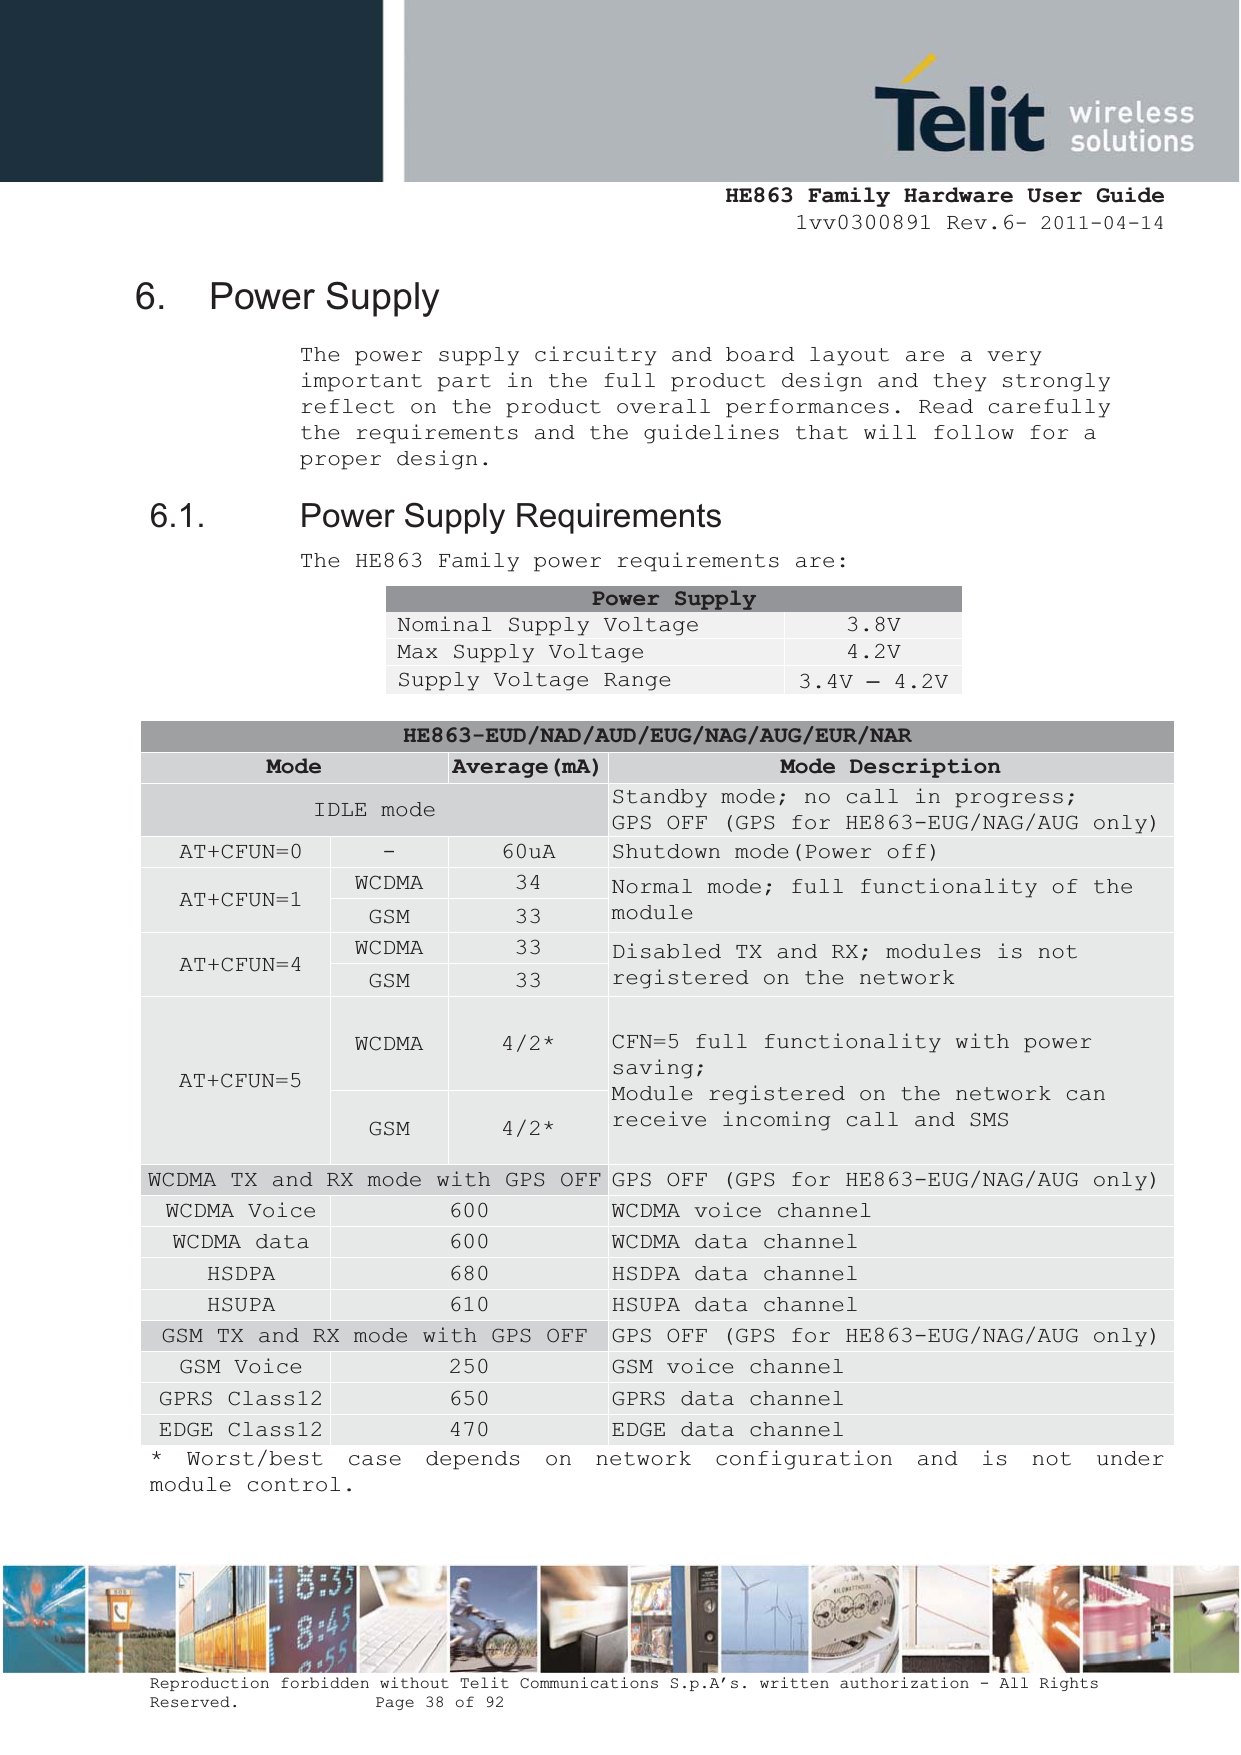  HE863 Family Hardware User Guide 1vv0300891 Rev.6- 2011-04-14    Reproduction forbidden without Telit Communications S.p.A’s. written authorization - All Rights Reserved.    Page 38 of 92  6. Power Supply The power supply circuitry and board layout are a very important part in the full product design and they strongly reflect on the product overall performances. Read carefully the requirements and the guidelines that will follow for a proper design. 6.1.  Power Supply Requirements The HE863 Family power requirements are: Power Supply Nominal Supply Voltage  3.8V Max Supply Voltage  4.2V Supply Voltage Range  3.4V – 4.2V  HE863-EUD/NAD/AUD/EUG/NAG/AUG/EUR/NARMode Average(mA) Mode Description IDLE mode  Standby mode; no call in progress;  GPS OFF (GPS for HE863-EUG/NAG/AUG only)AT+CFUN=0  -  60uA  Shutdown mode(Power off) AT+CFUN=1  WCDMA  34  Normal mode; full functionality of the module GSM  33 AT+CFUN=4  WCDMA  33  Disabled TX and RX; modules is not registered on the network GSM  33 AT+CFUN=5 WCDMA  4/2*  CFN=5 full functionality with power saving; Module registered on the network can receive incoming call and SMS GSM  4/2* WCDMA TX and RX mode with GPS OFF GPS OFF (GPS for HE863-EUG/NAG/AUG only)WCDMA Voice  600  WCDMA voice channel WCDMA data  600  WCDMA data channel HSDPA  680  HSDPA data channel HSUPA  610  HSUPA data channel GSM TX and RX mode with GPS OFF  GPS OFF (GPS for HE863-EUG/NAG/AUG only)GSM Voice  250  GSM voice channel GPRS Class12  650  GPRS data channel EDGE Class12  470  EDGE data channel * Worst/best case depends on network configuration and is not under module control.  